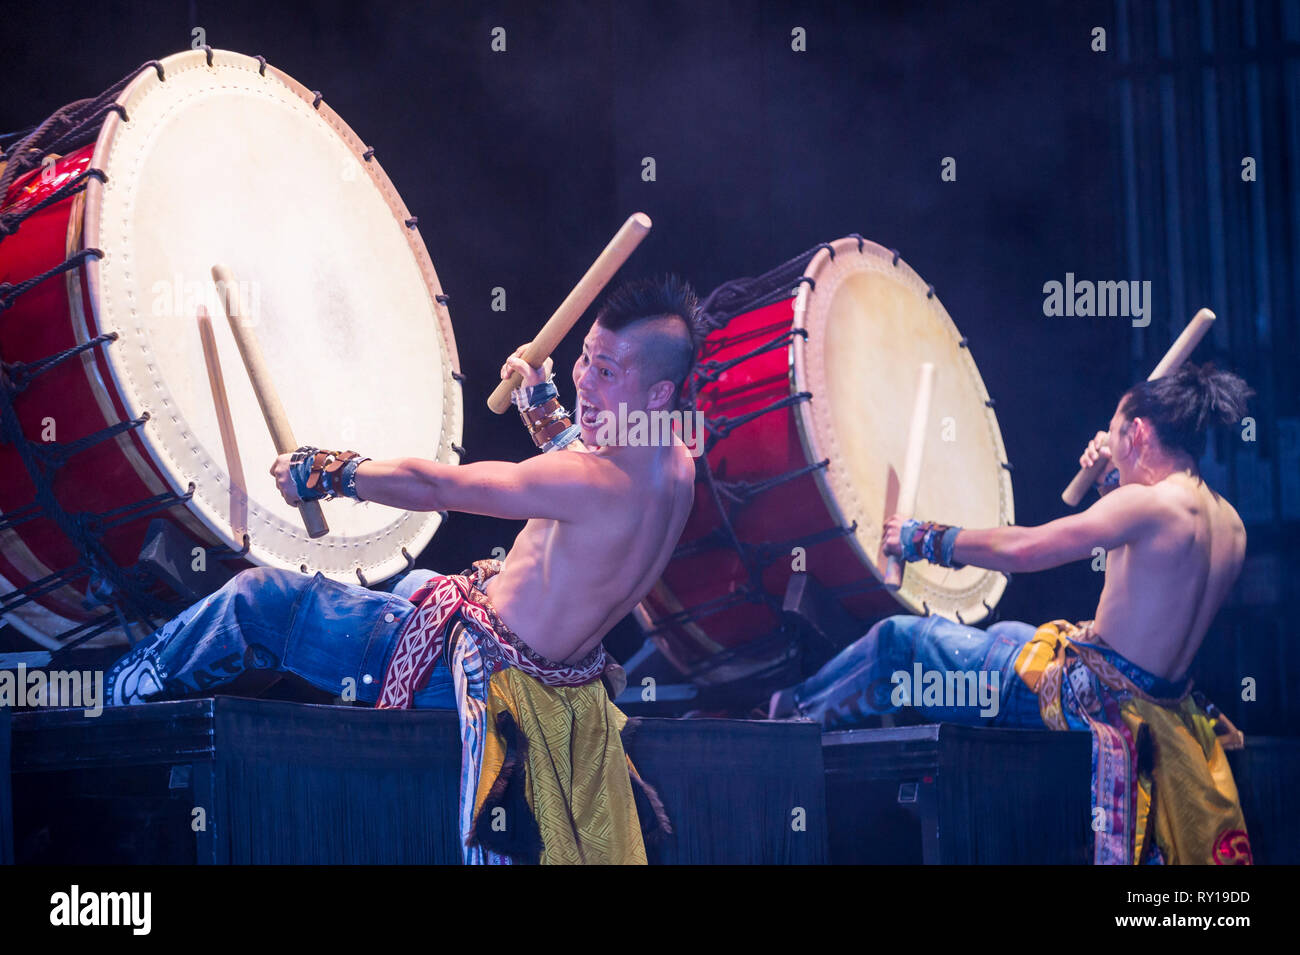 London, UK. 11 March 2019. Preview by Yamato, the Japanese taiko drumming  troupe, performing their newest work 'Passion'. The show opens to the  public at The Peacock theatre 12 to 31 March